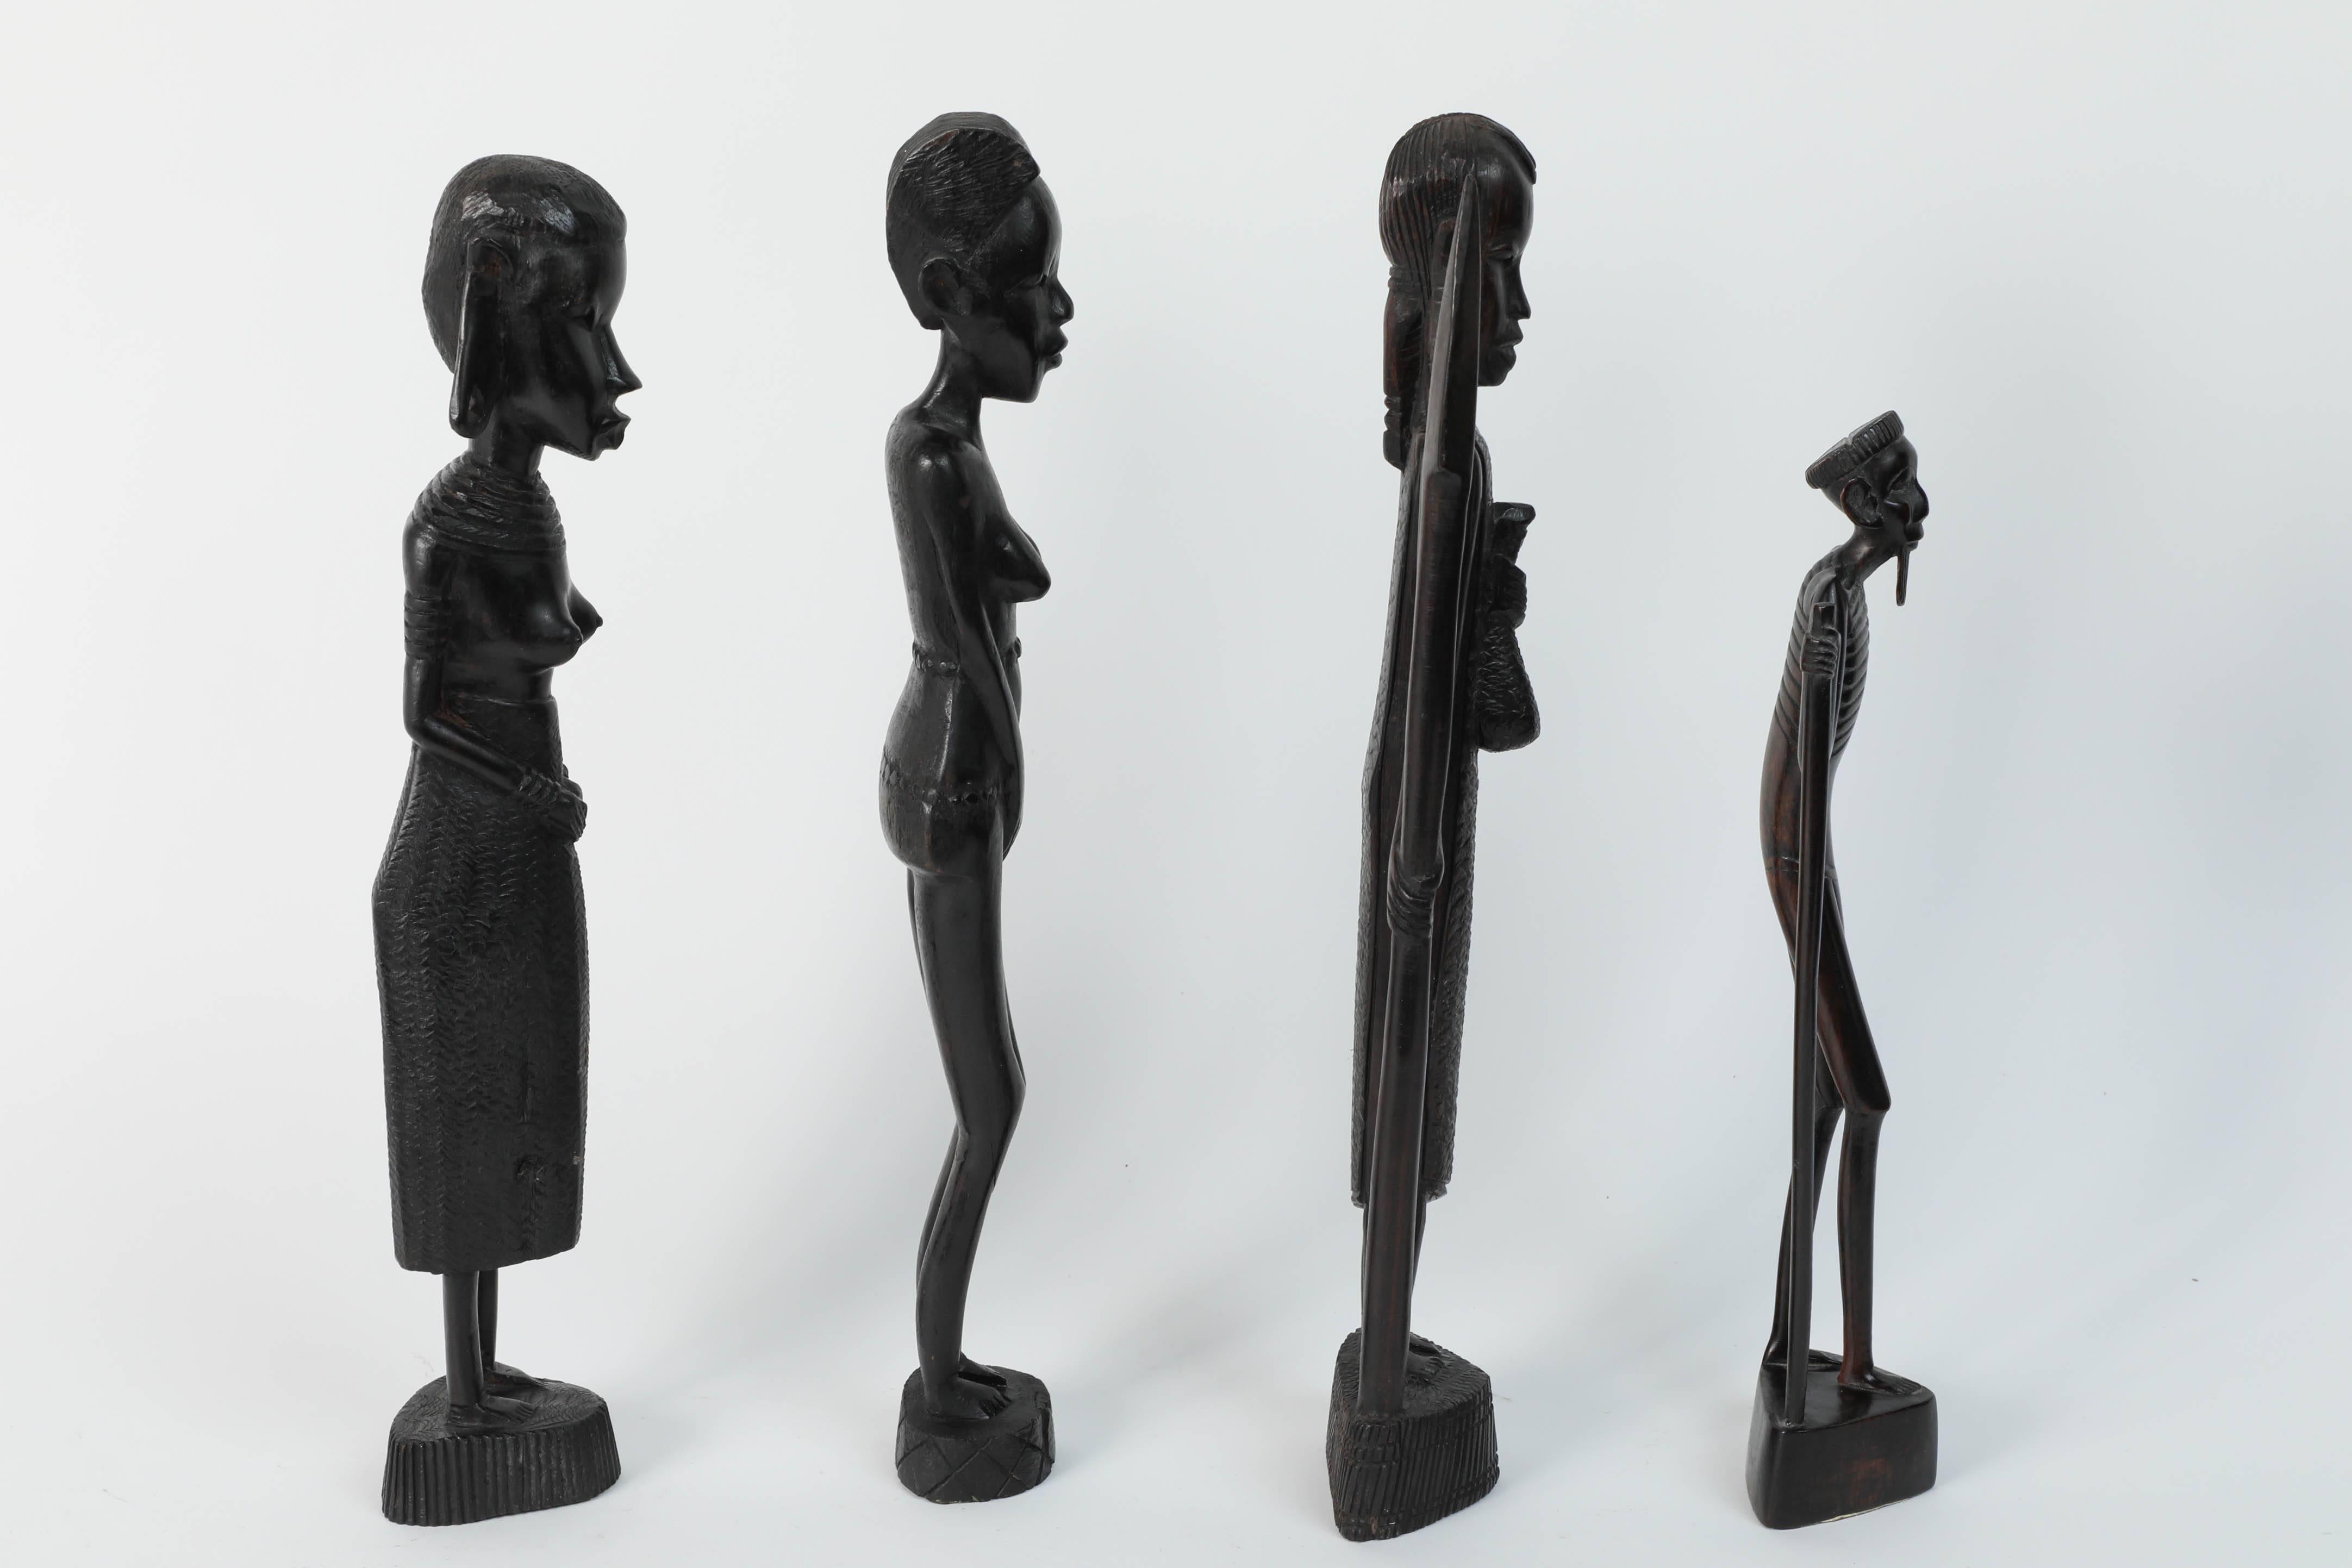 Ebony Decorative Hand-Carved African Set of Four Statues from Kenya